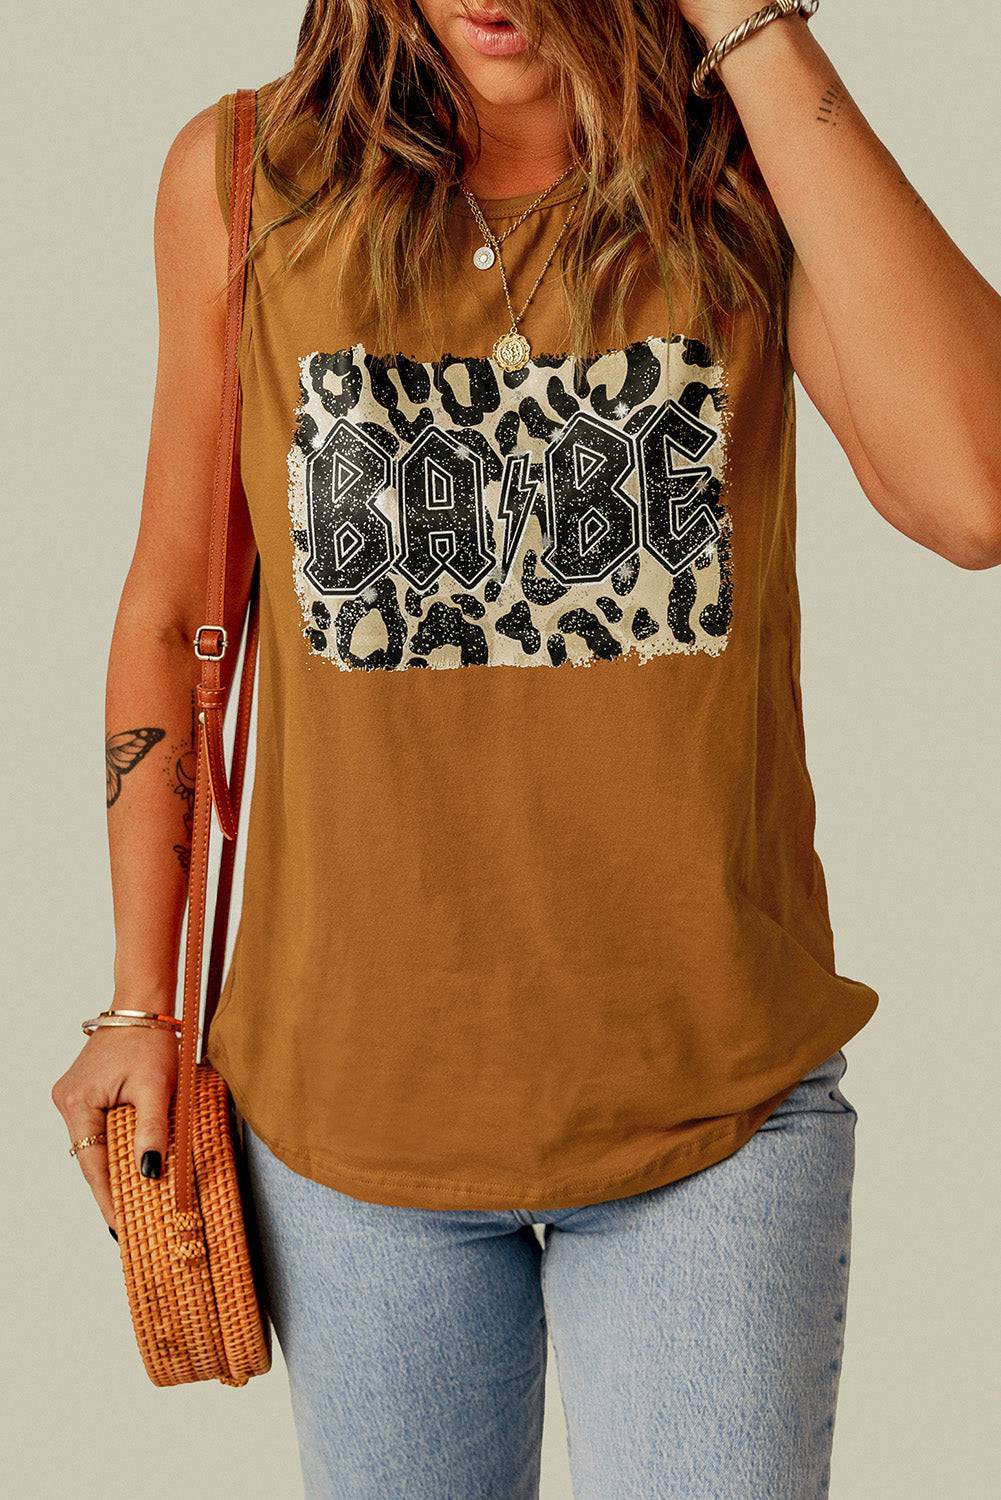 Leopard Babe Graphic Tank - Unleash Your Fierce and Feminine Side with Jungle-Inspired Style - Made from Pure Cotton for All-Day Comfort - Guy Christopher